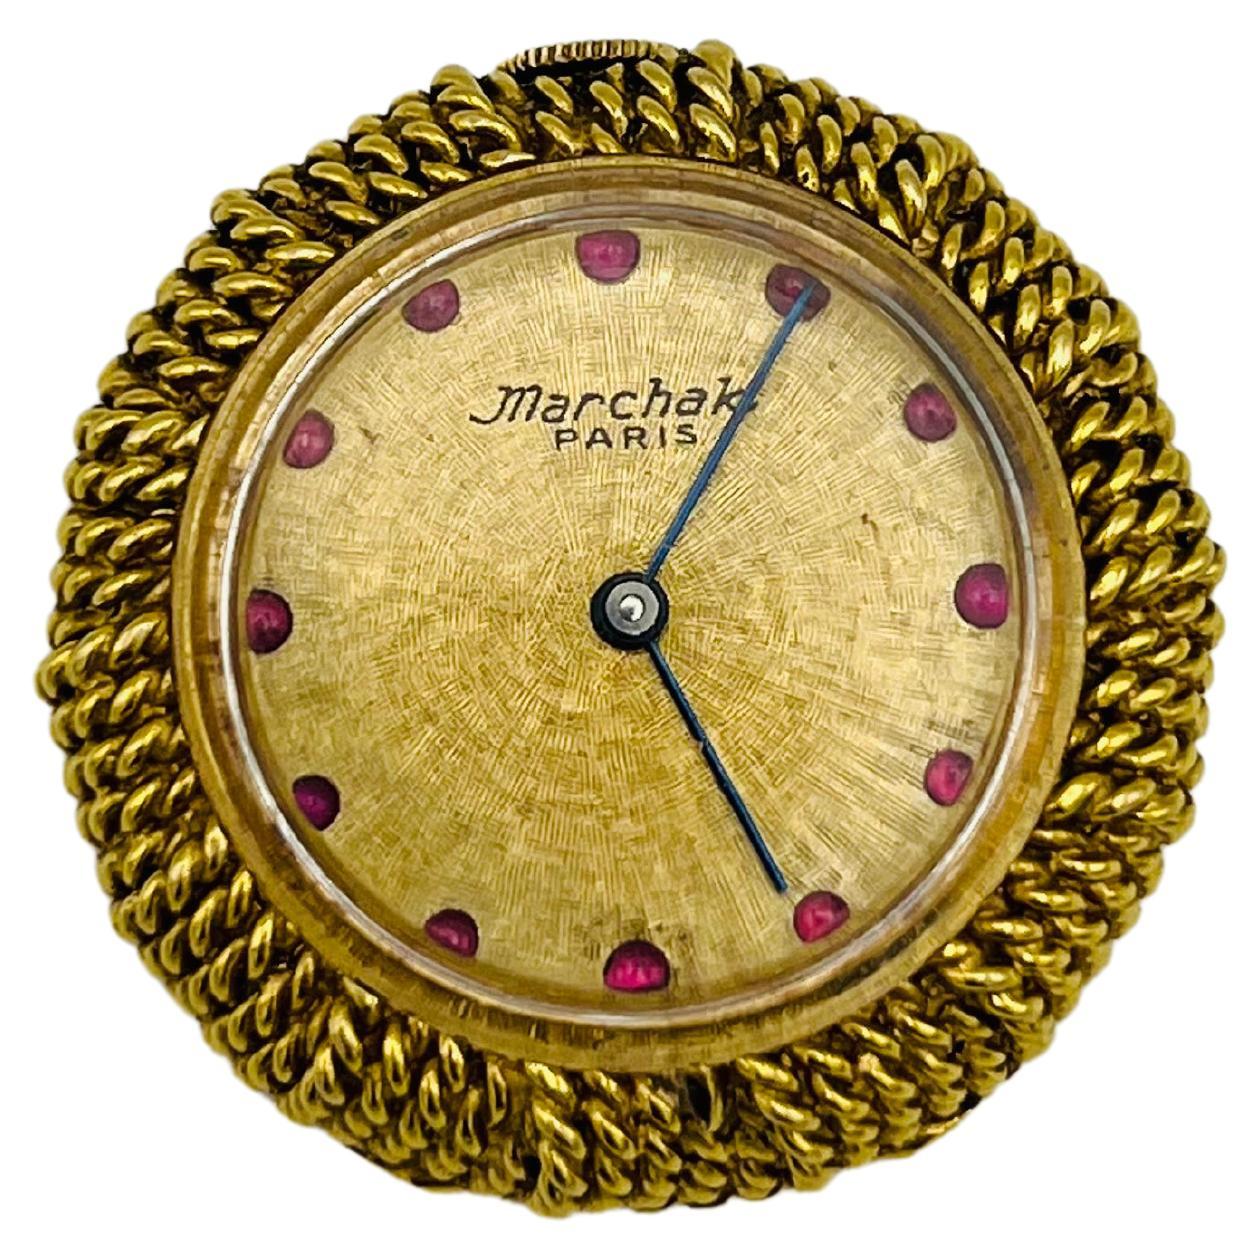 Marchak Paris Yellow Gold and Ruby Pocket Watch